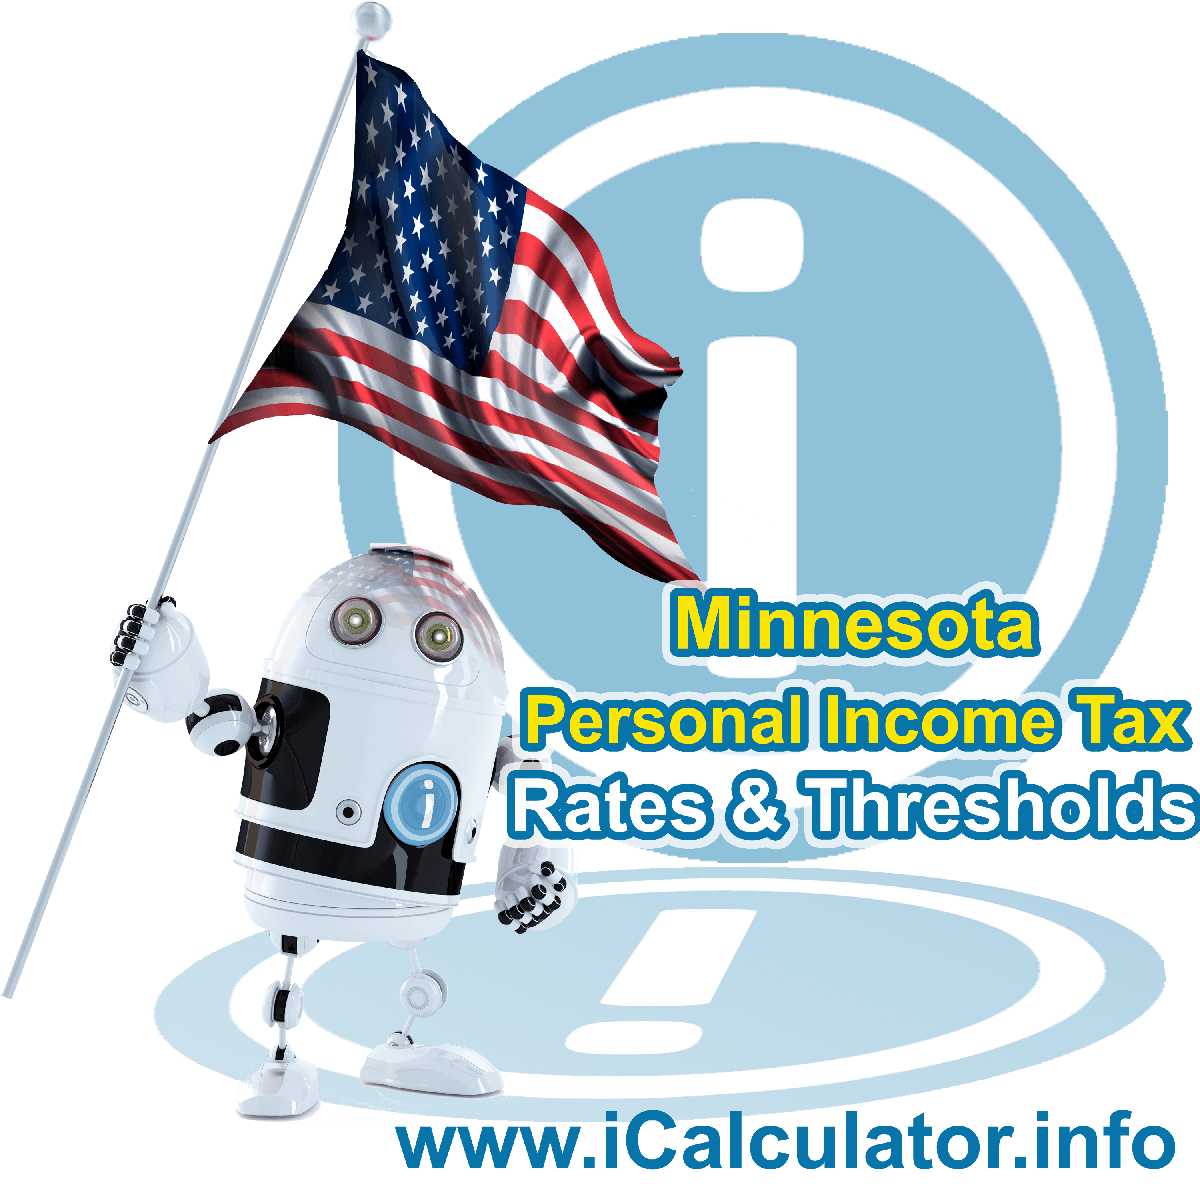 Minnesota State Tax Tables 2018. This image displays details of the Minnesota State Tax Tables for the 2018 tax return year which is provided in support of the 2018 US Tax Calculator